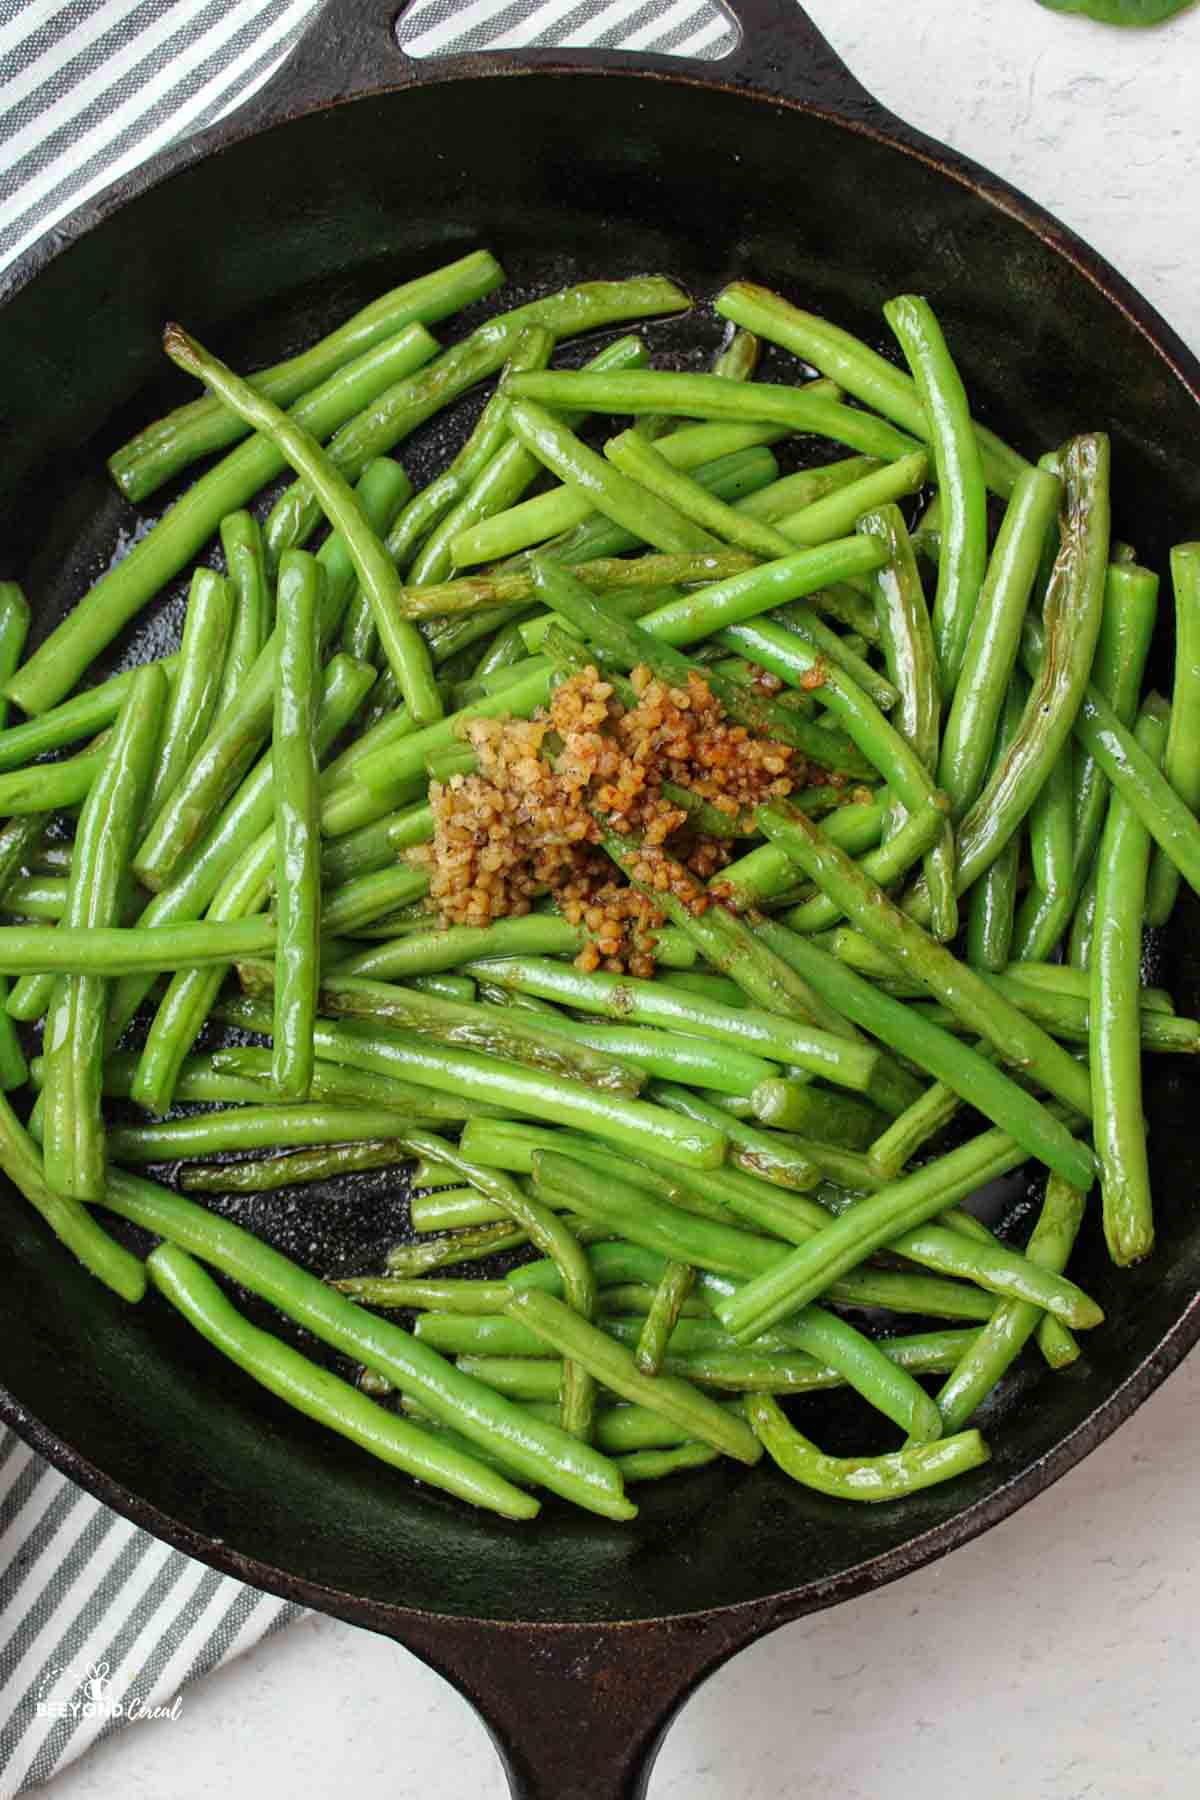 sauteed green beans in skillet with garlic and seasonings added on top.